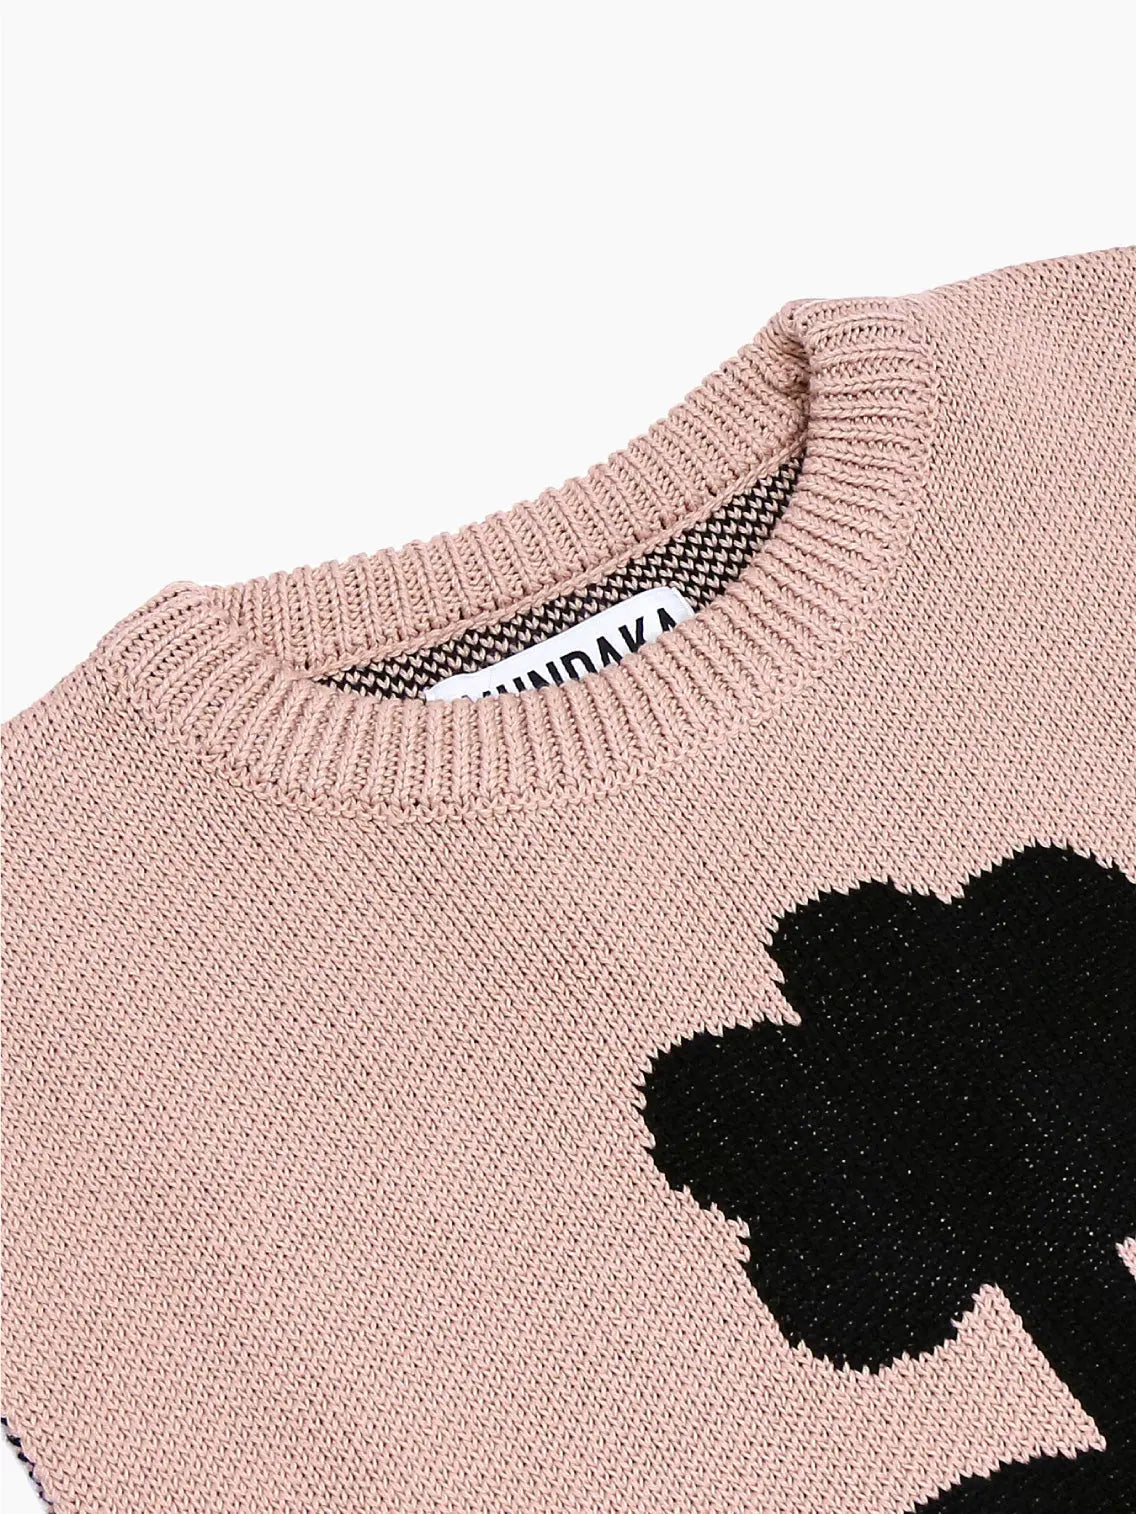 A sleeveless, light pink knit sweater with a black, minimalist flower design in the center. The sweater features a crew neck and a visible brand tag at the neckline. Photographed against a plain white background, this exquisite Flower Vest Beige from Mundaka captures the essence of Barcelona fashion effortlessly.